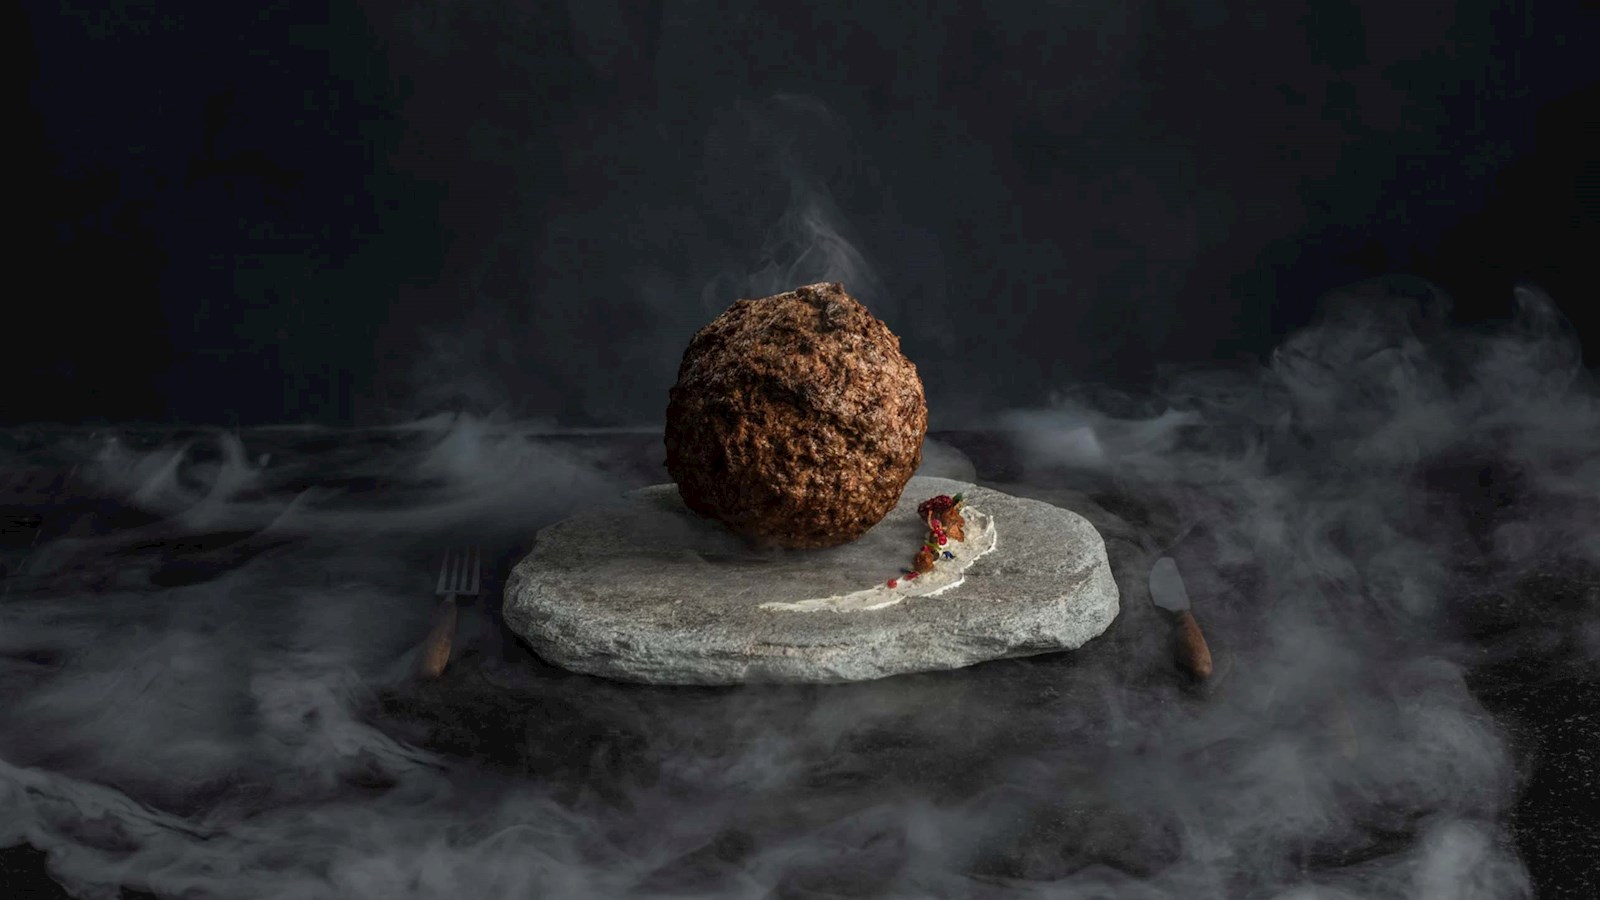 A large meatball made of mammoth meat on a stone platter in a dark studio set with mist swirling around it